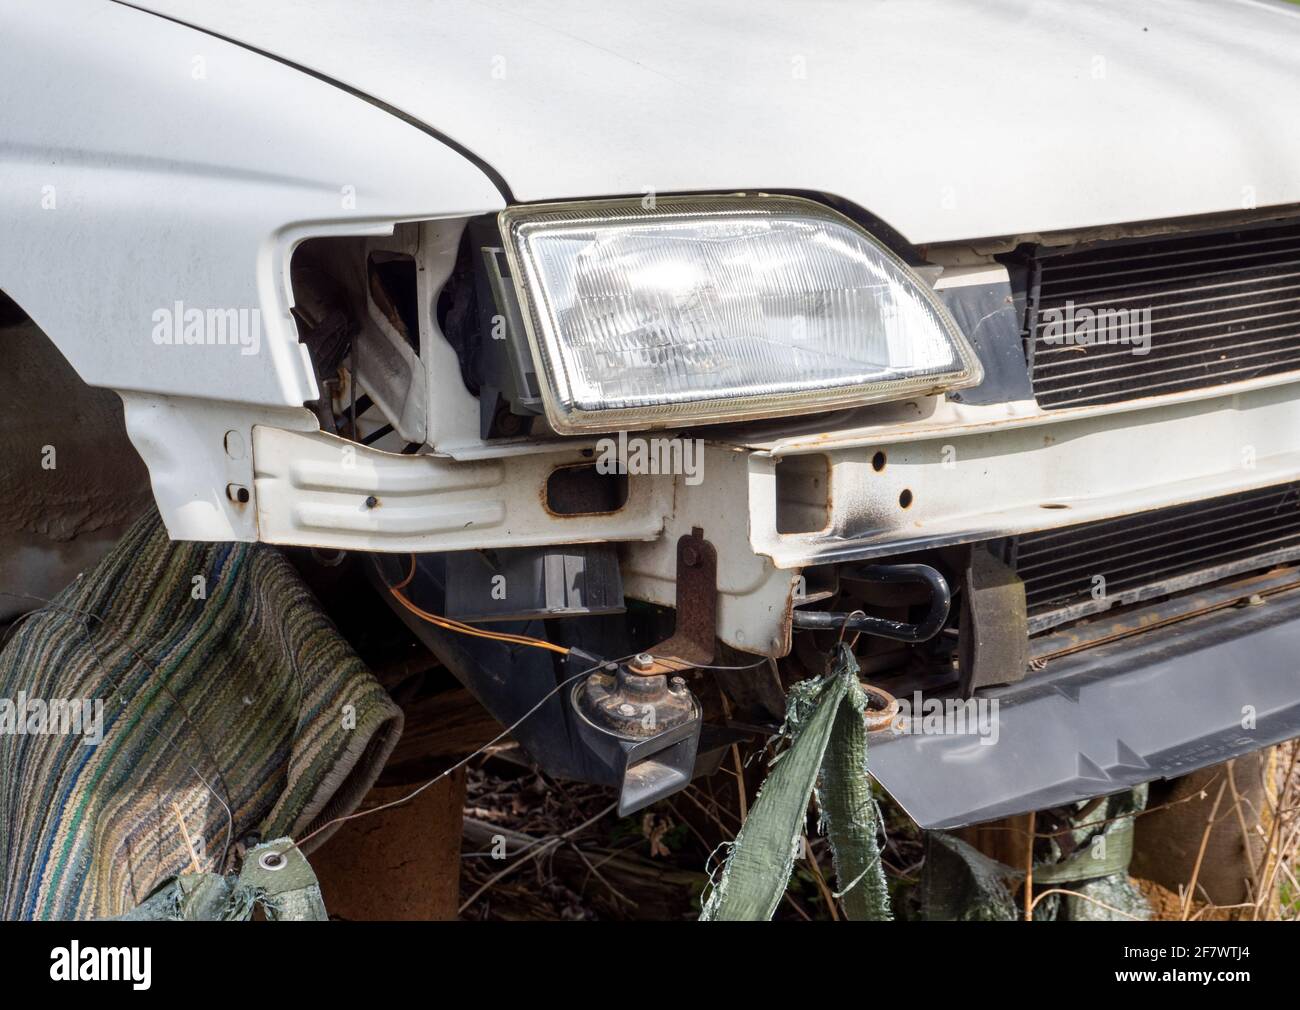 Car after an accident in the workshop Stock Photo